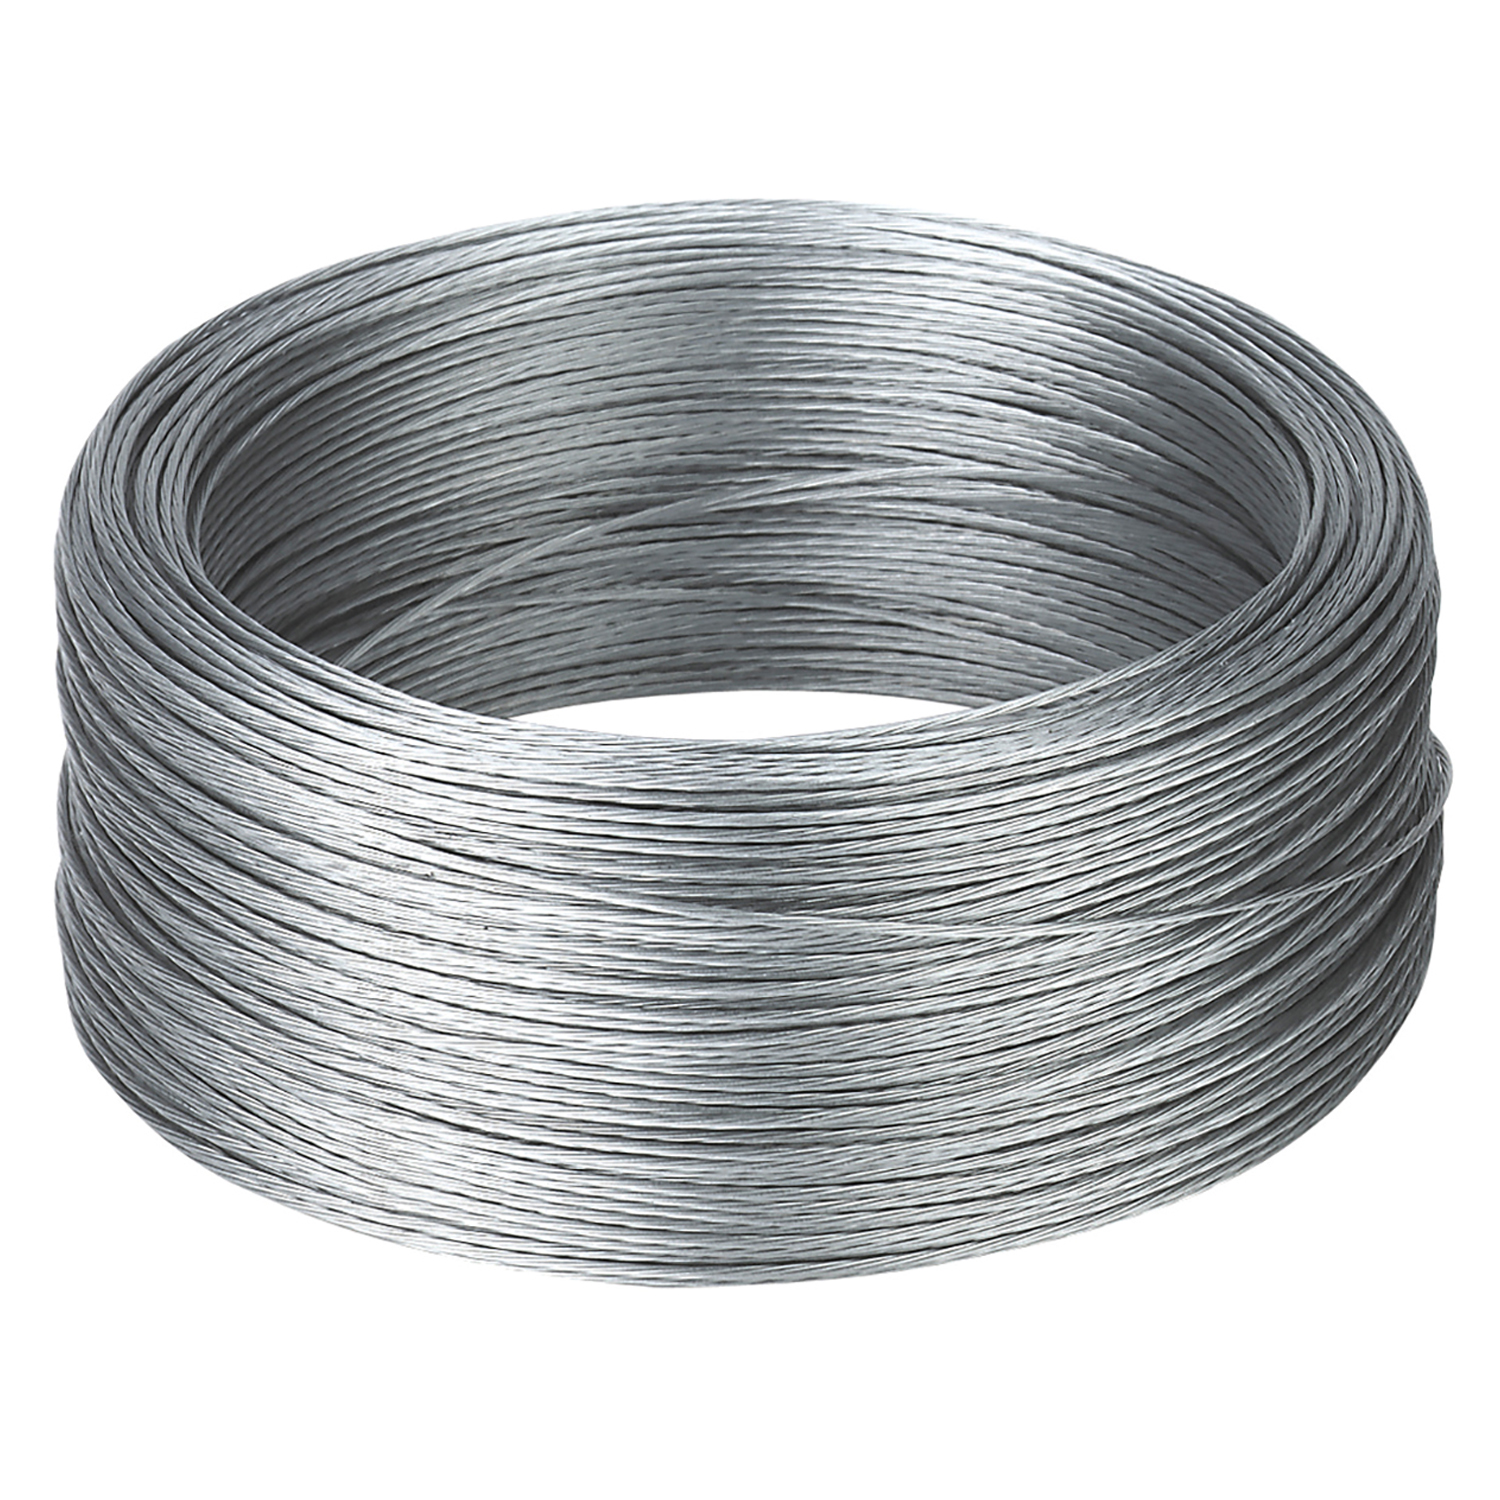 CORRAL STRANDED WIRE GALVVANISED 200 METRES 200M